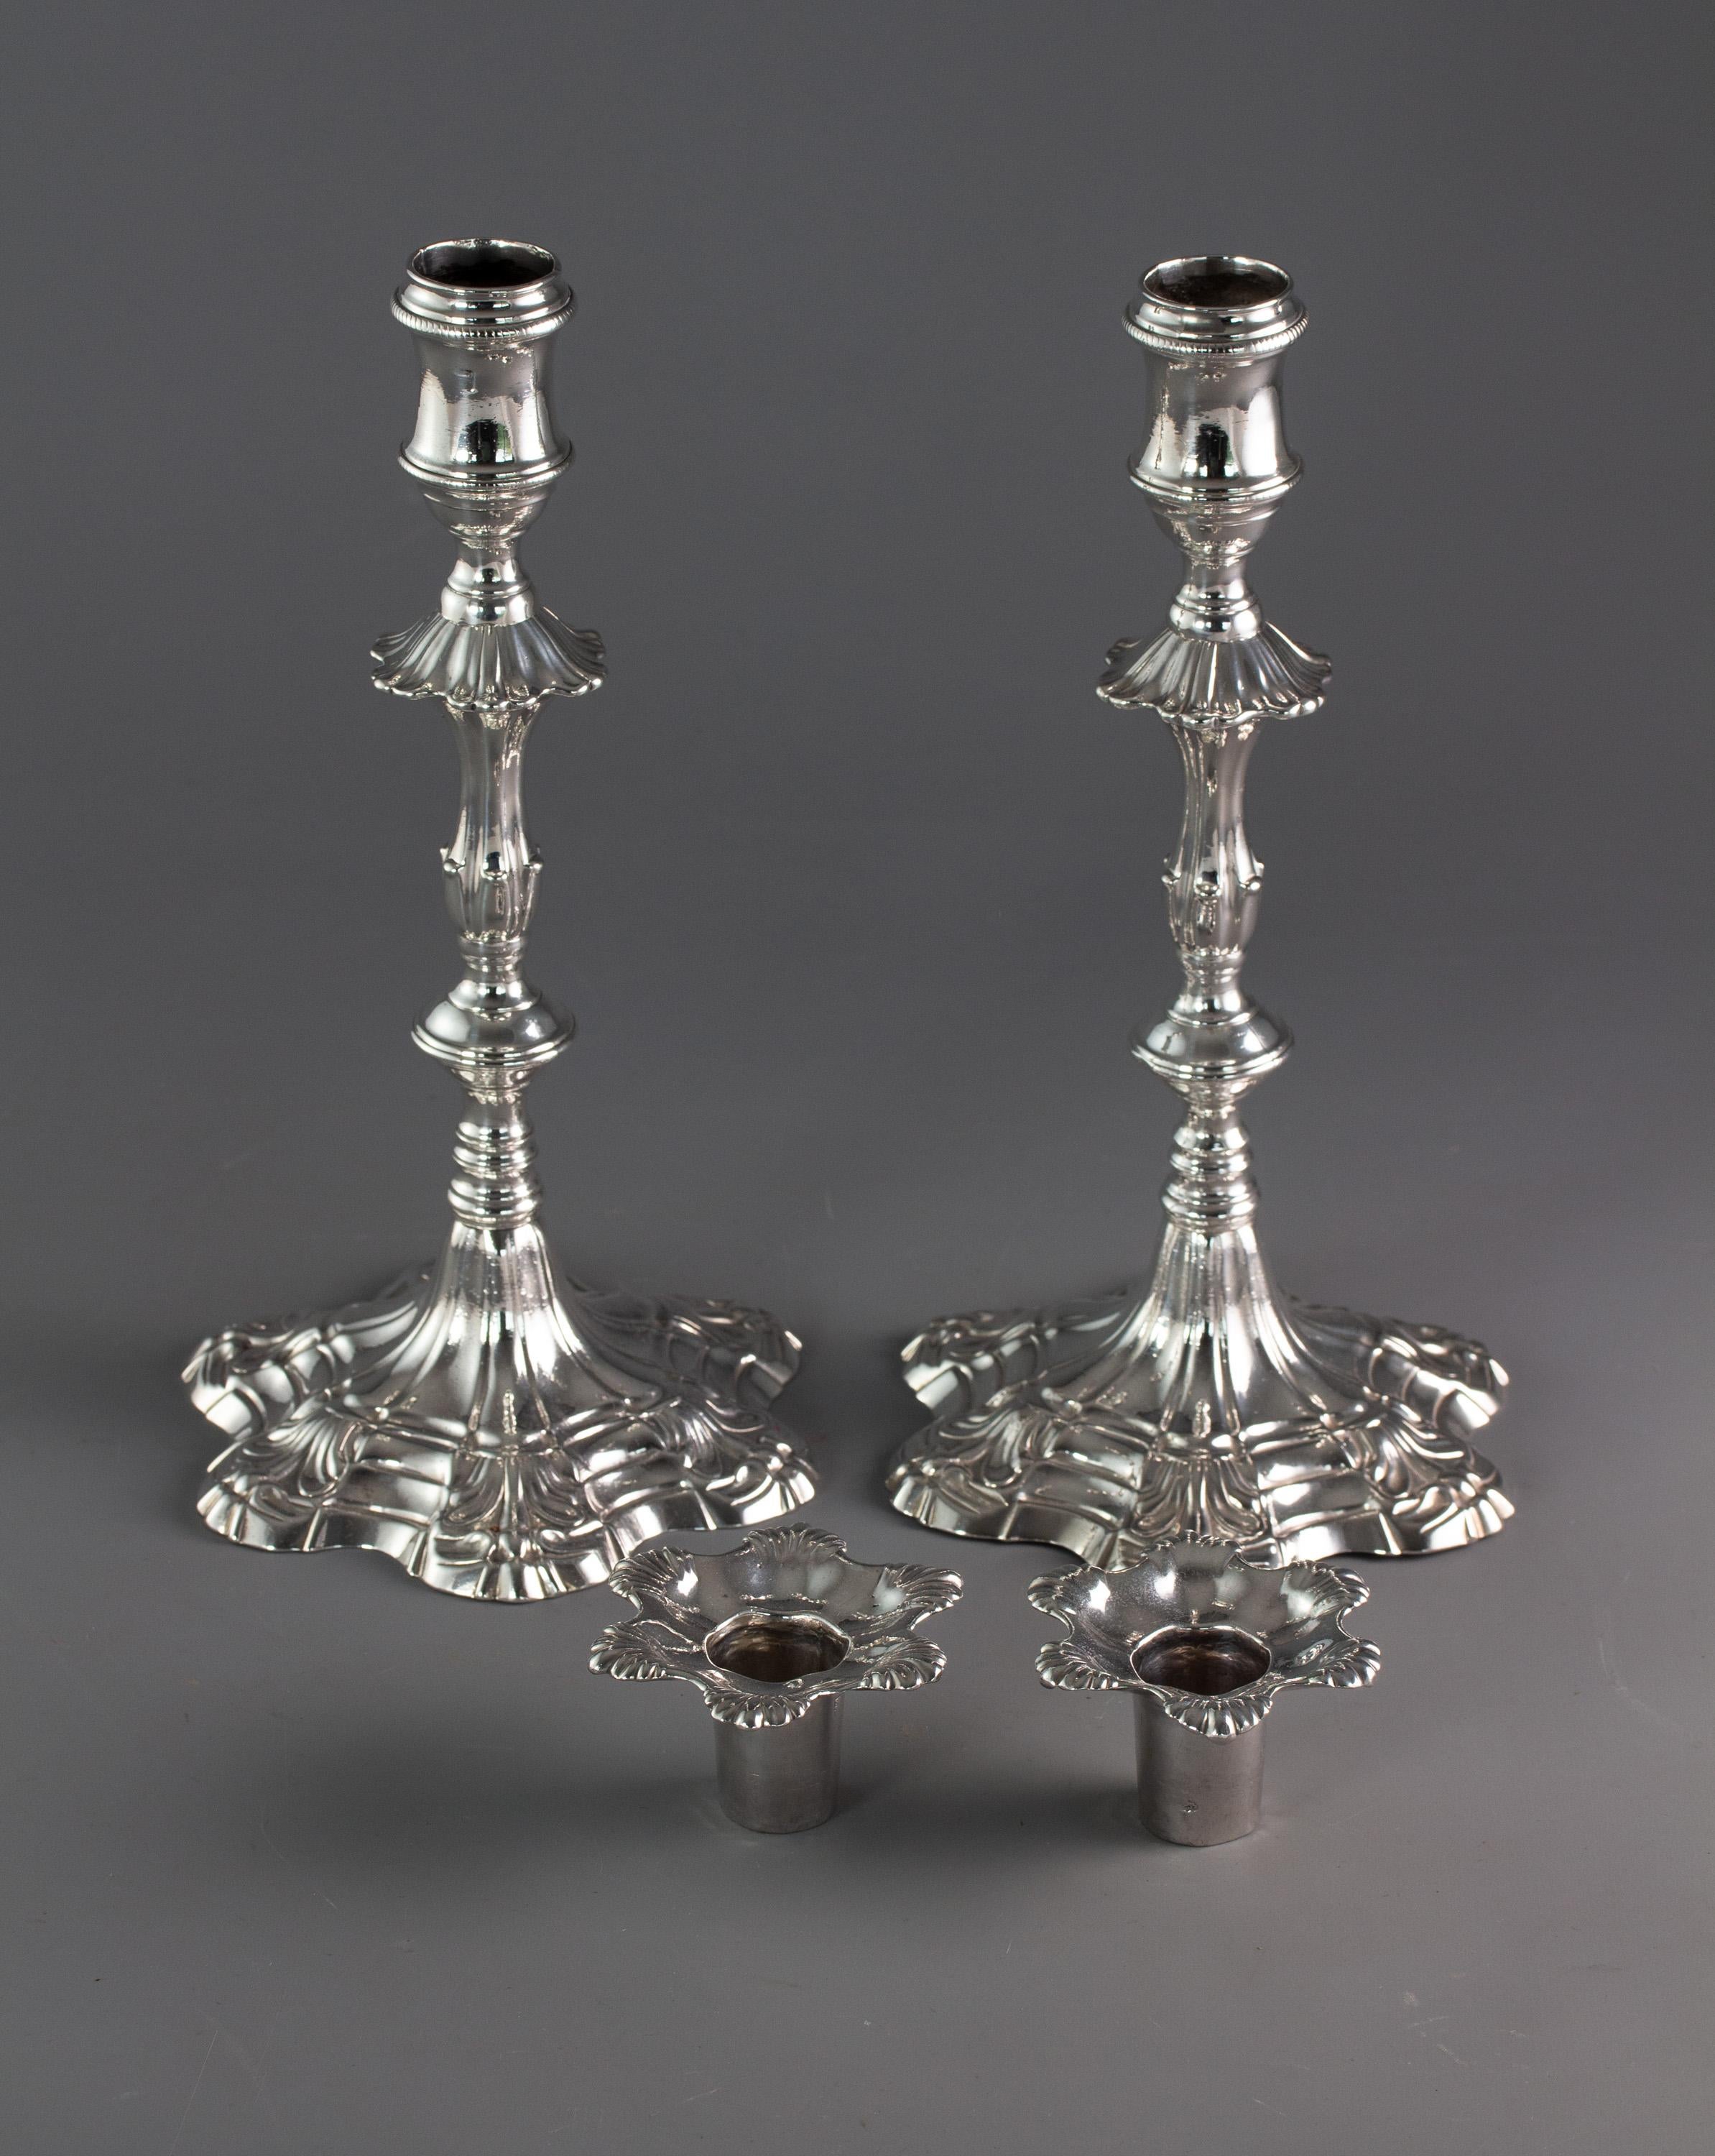 British Pair of George III Cast Silver Candlesticks, London, 1763 by William Cafe